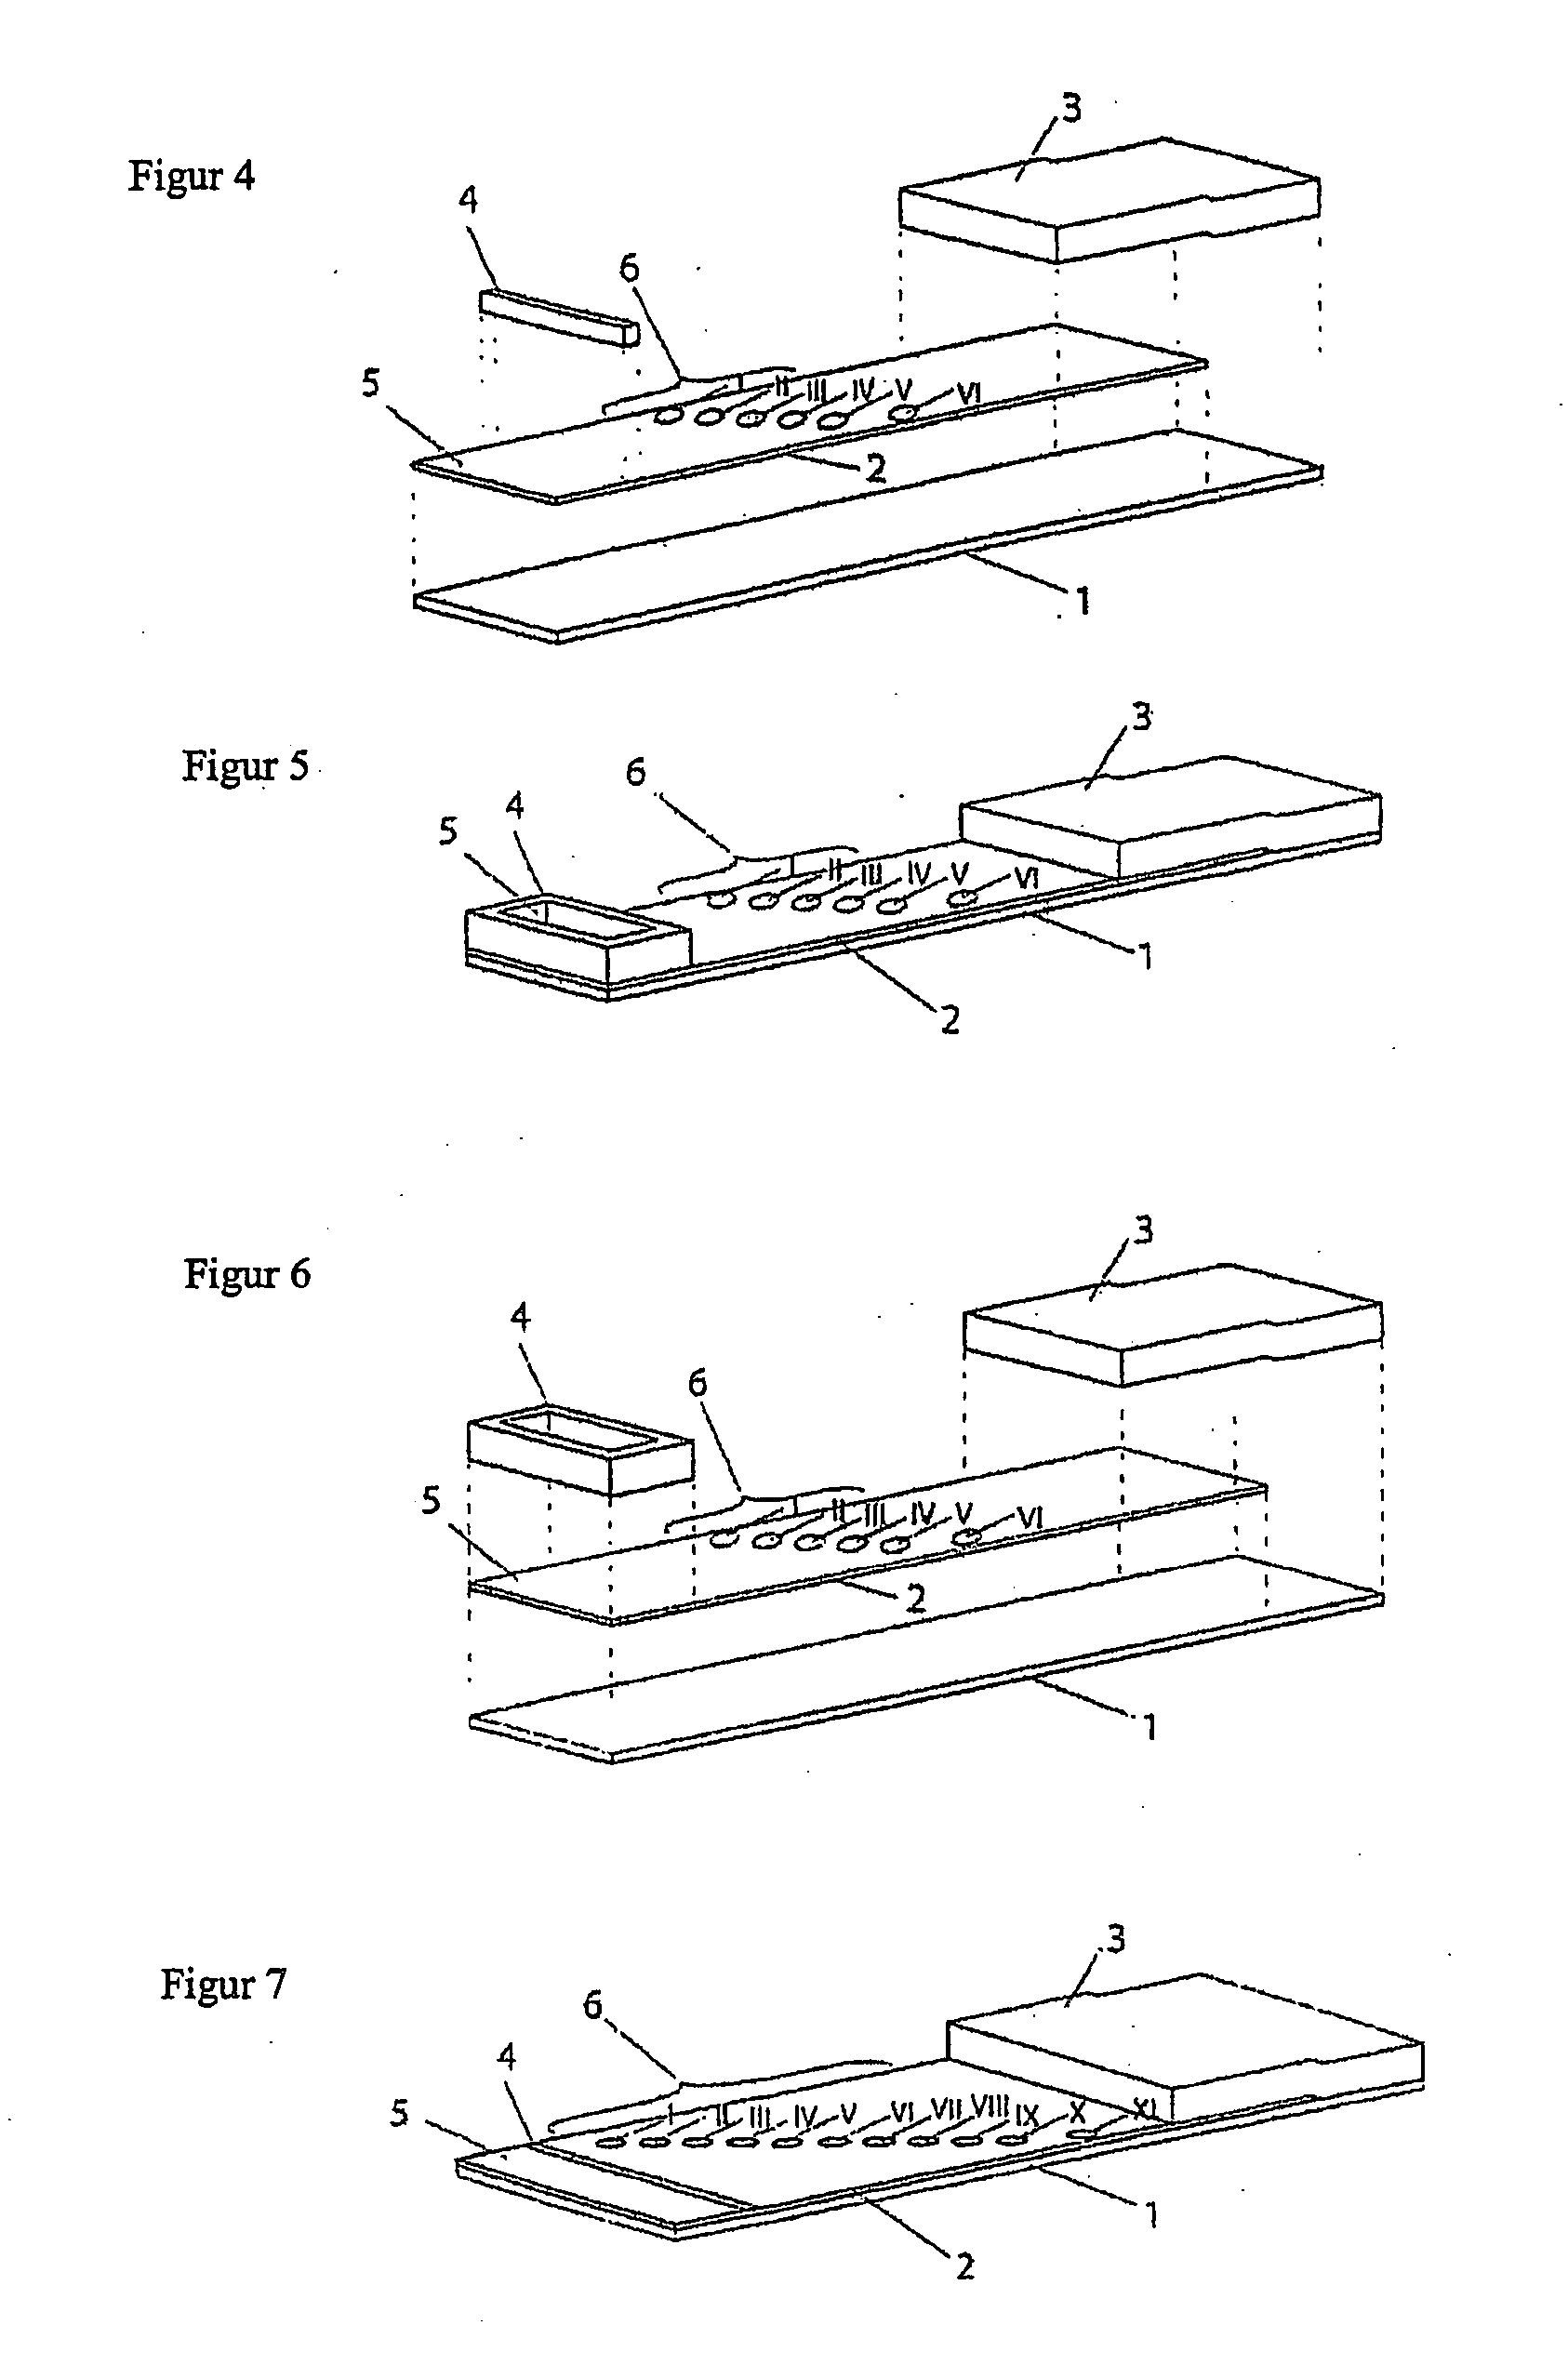 Device and Method for Simultaneously Identifying Blood Group Antigens